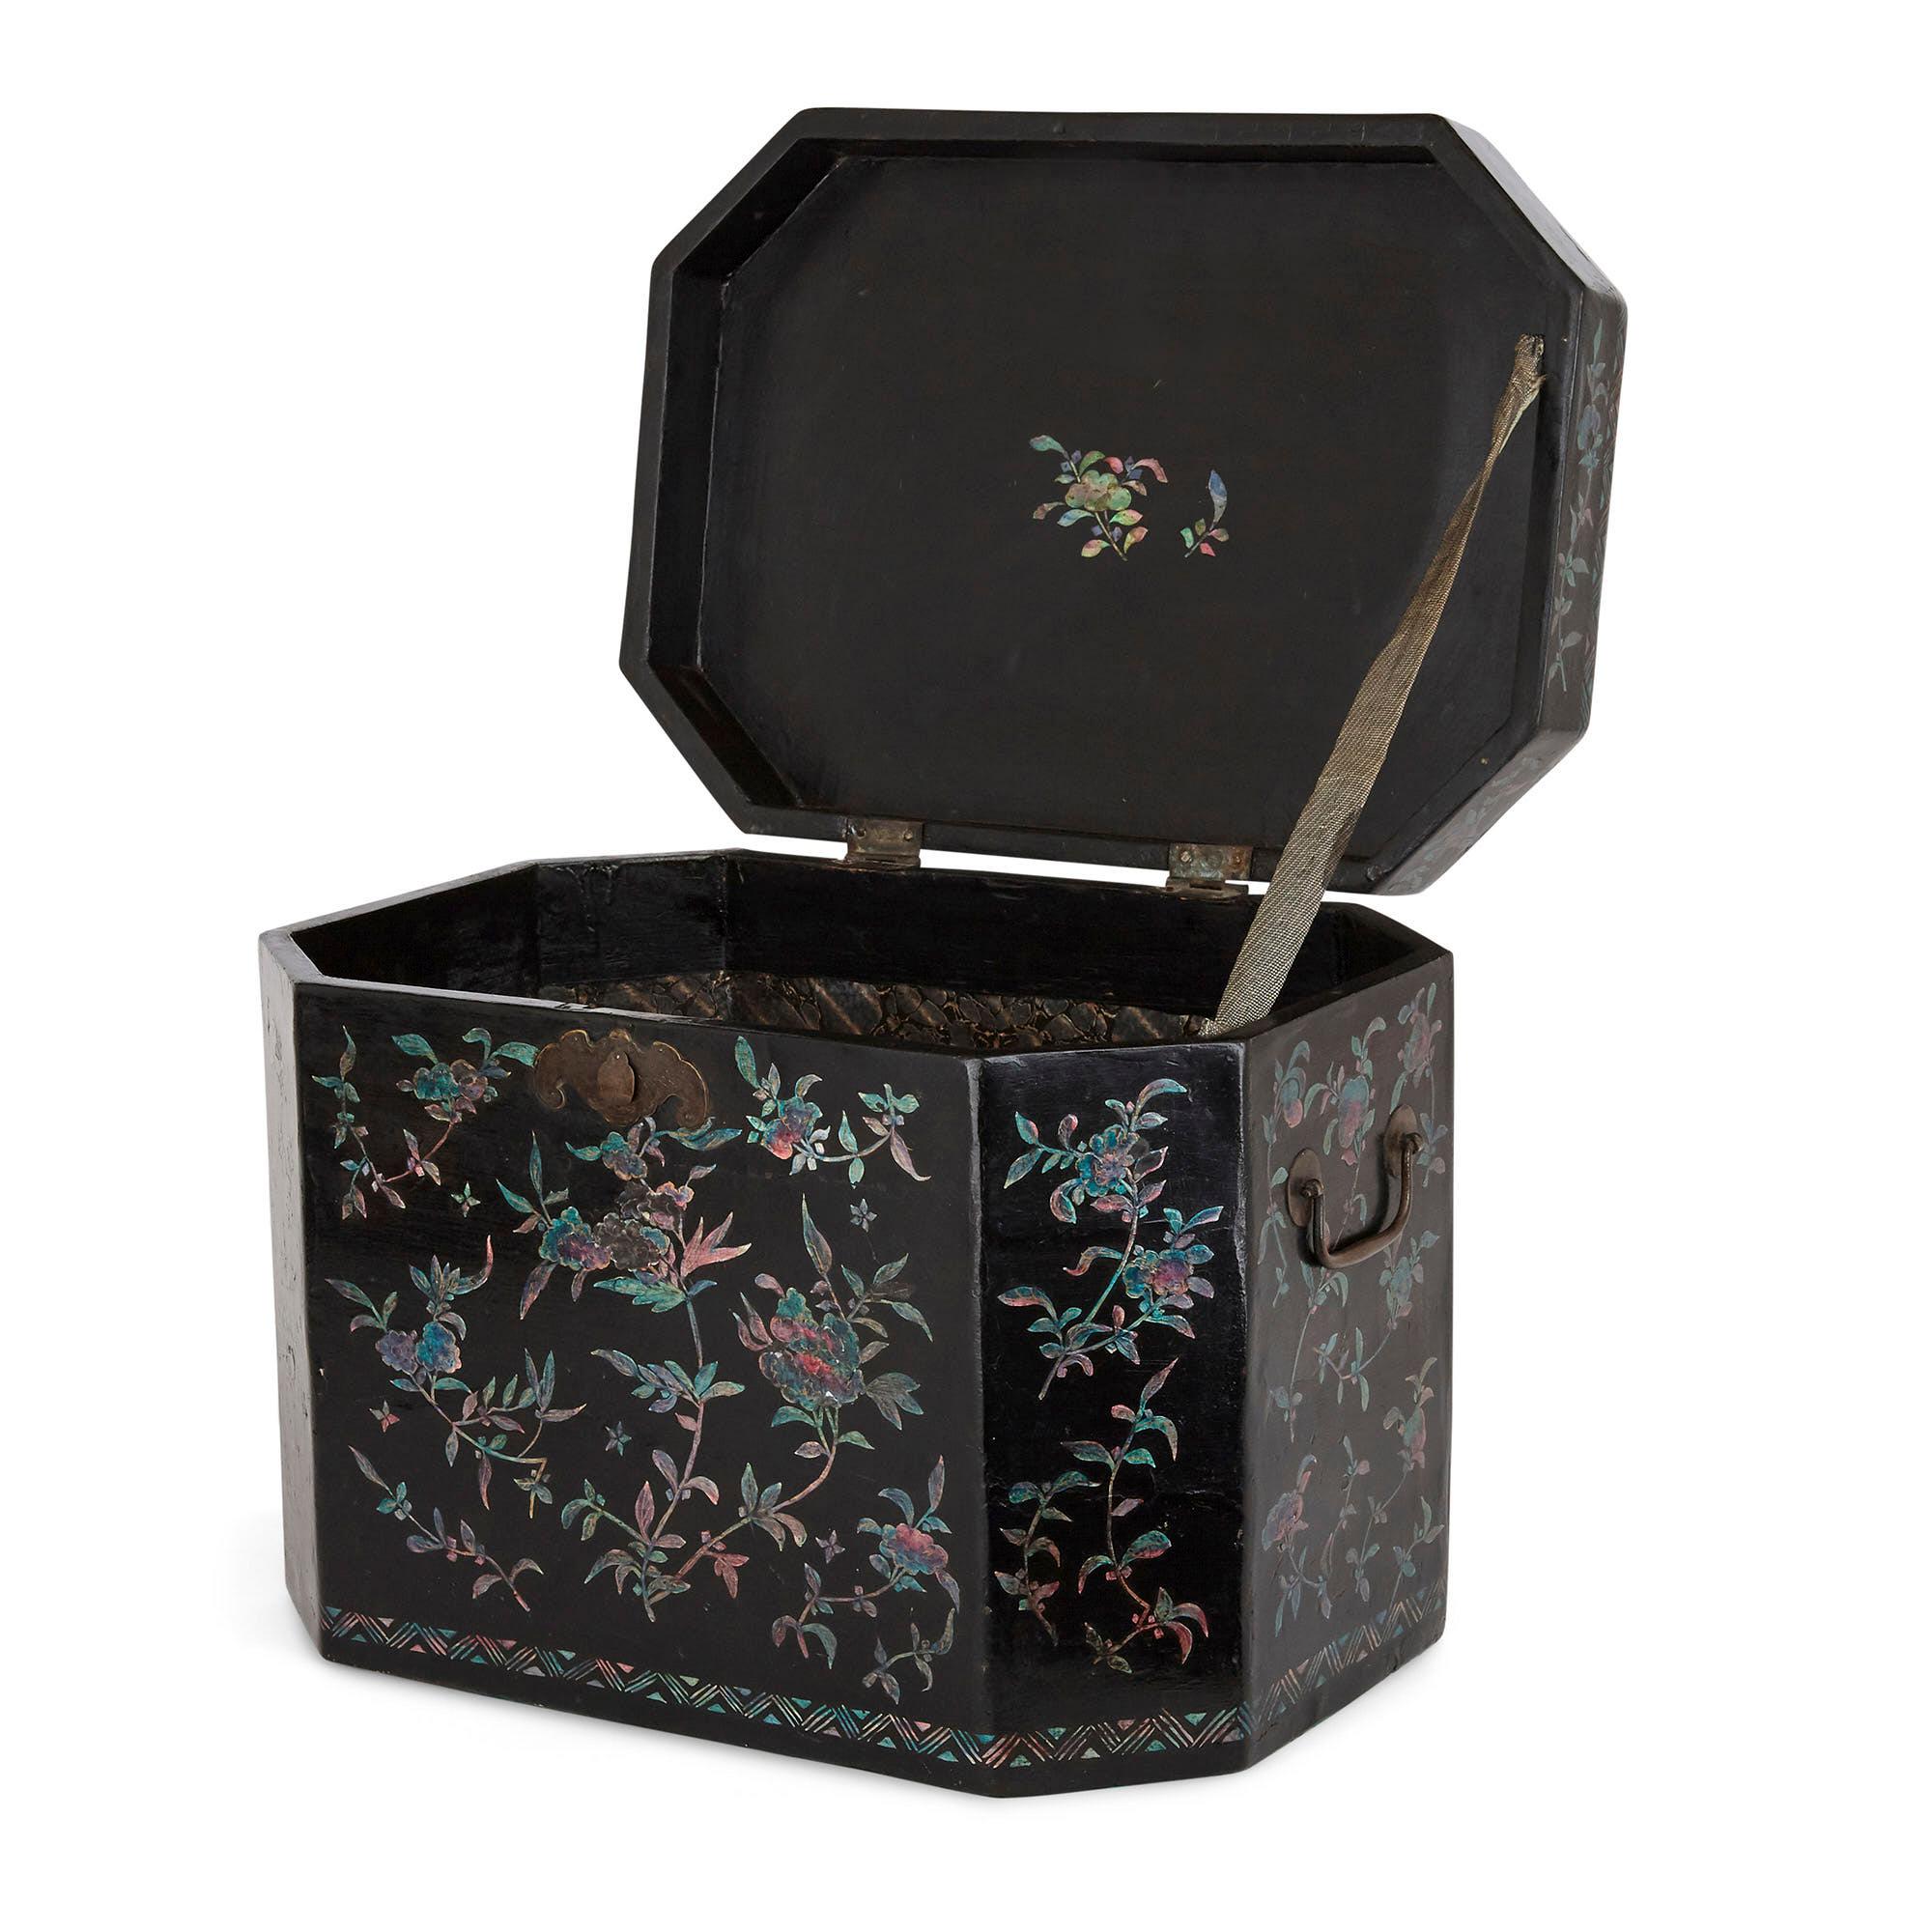 This duo comprises two Chinese work boxes: one, of lacquered and parcel giltwood, was produced circa 1850, while the second, of painted wood inlaid with ersatz mother of pearl, dates to the early 20th century. The boxes feature hinged lids and